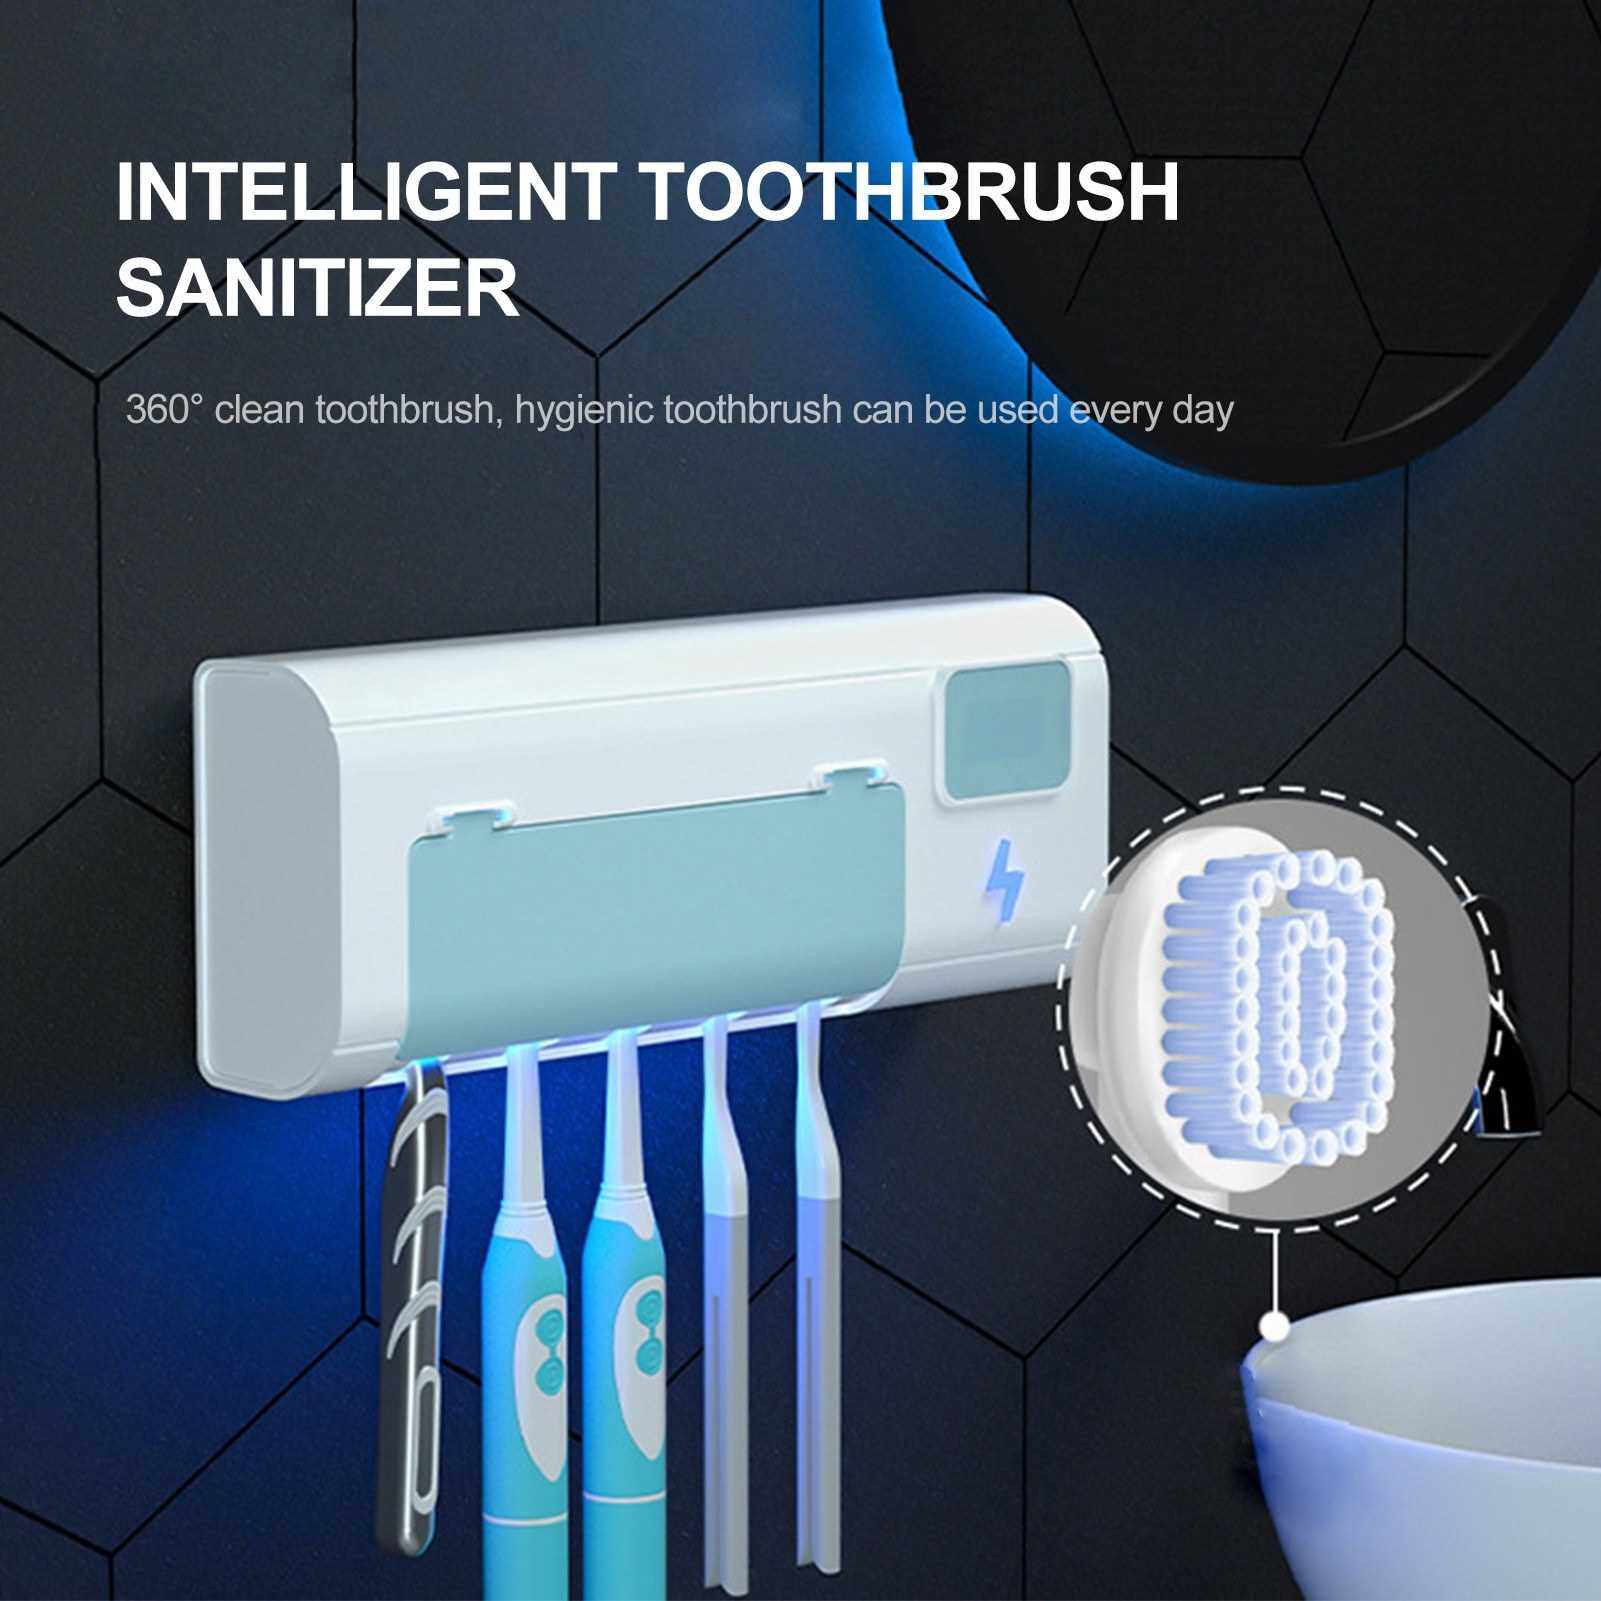 UV Toothbrush Sanitizer Intelligent Toothbrush Sanitizer Wall Mounted Bathroom Toothbrush Holder with Timing Function USB Charging for Toothbrush Organizer for Ladies Baby Family (Blue)